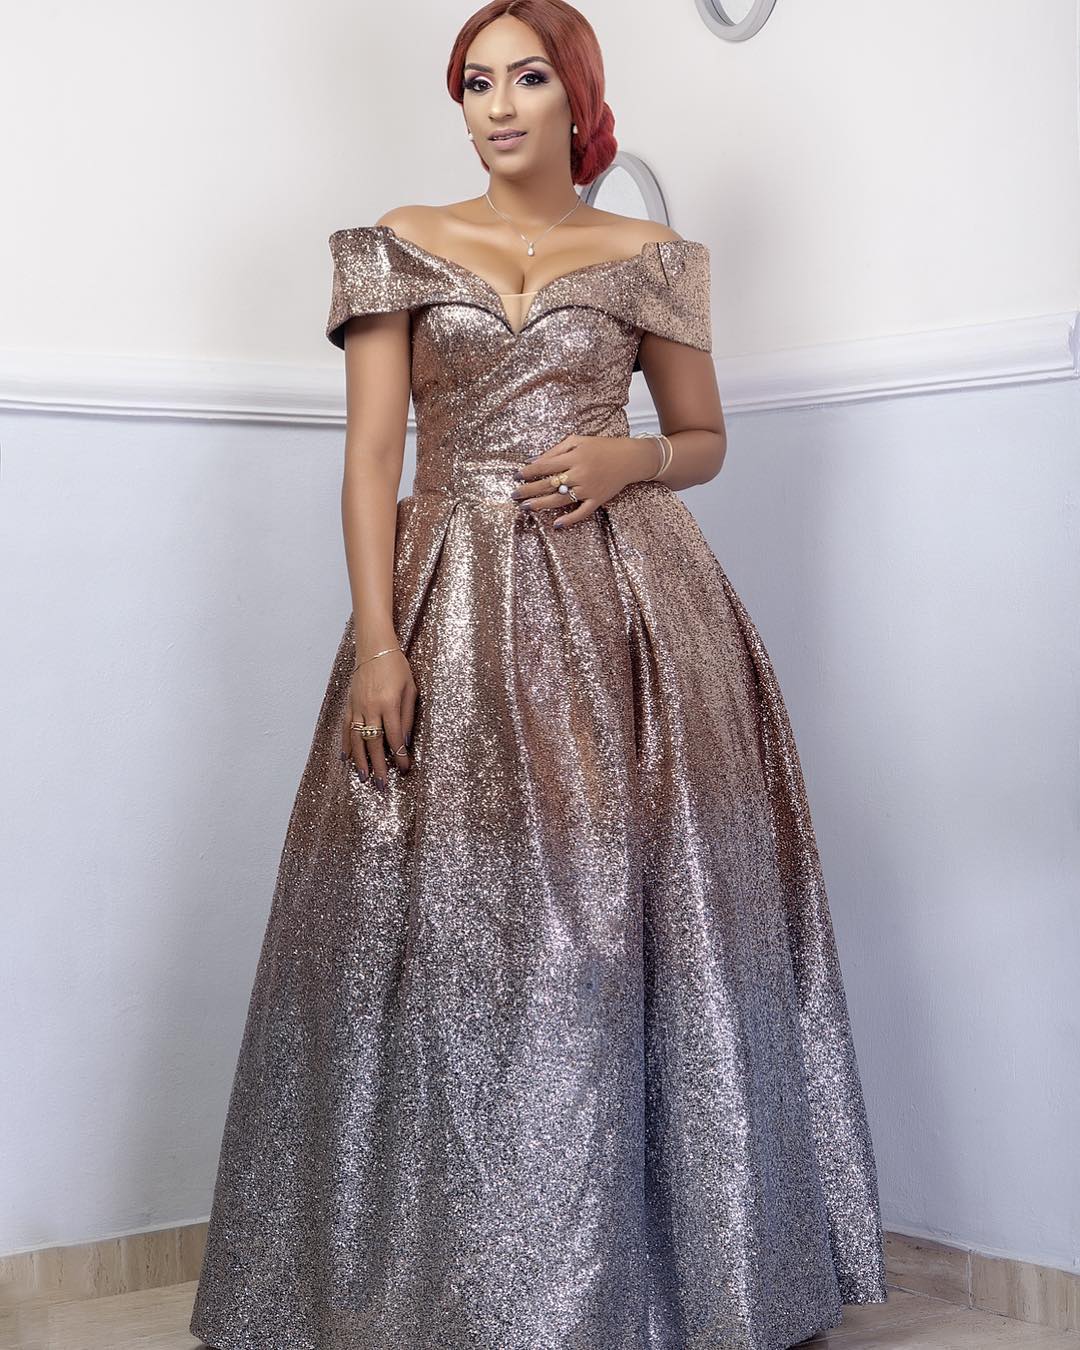 Nigerian celebrities Step Out For MET Gala Themed Event In Stunning Outfits